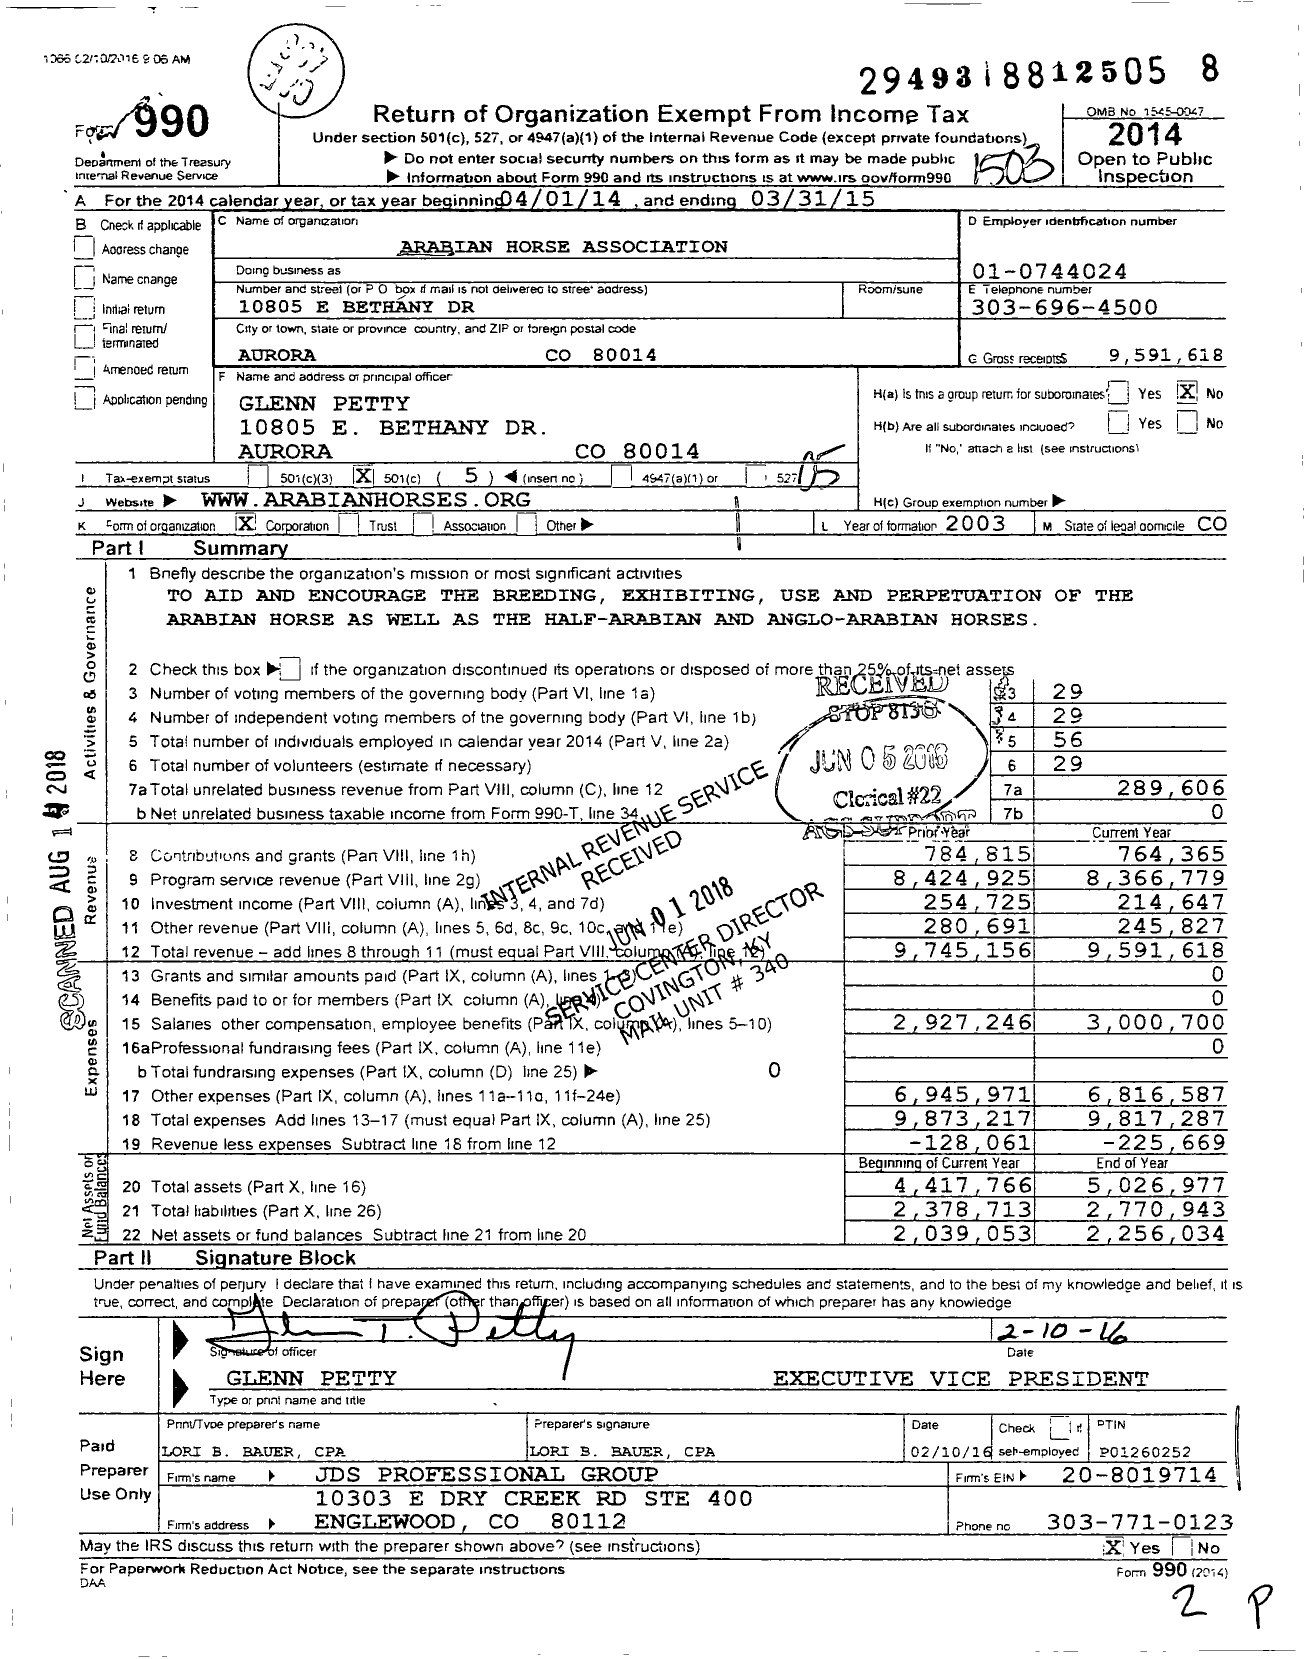 Image of first page of 2014 Form 990O for Arabian Horse Association (AHA)